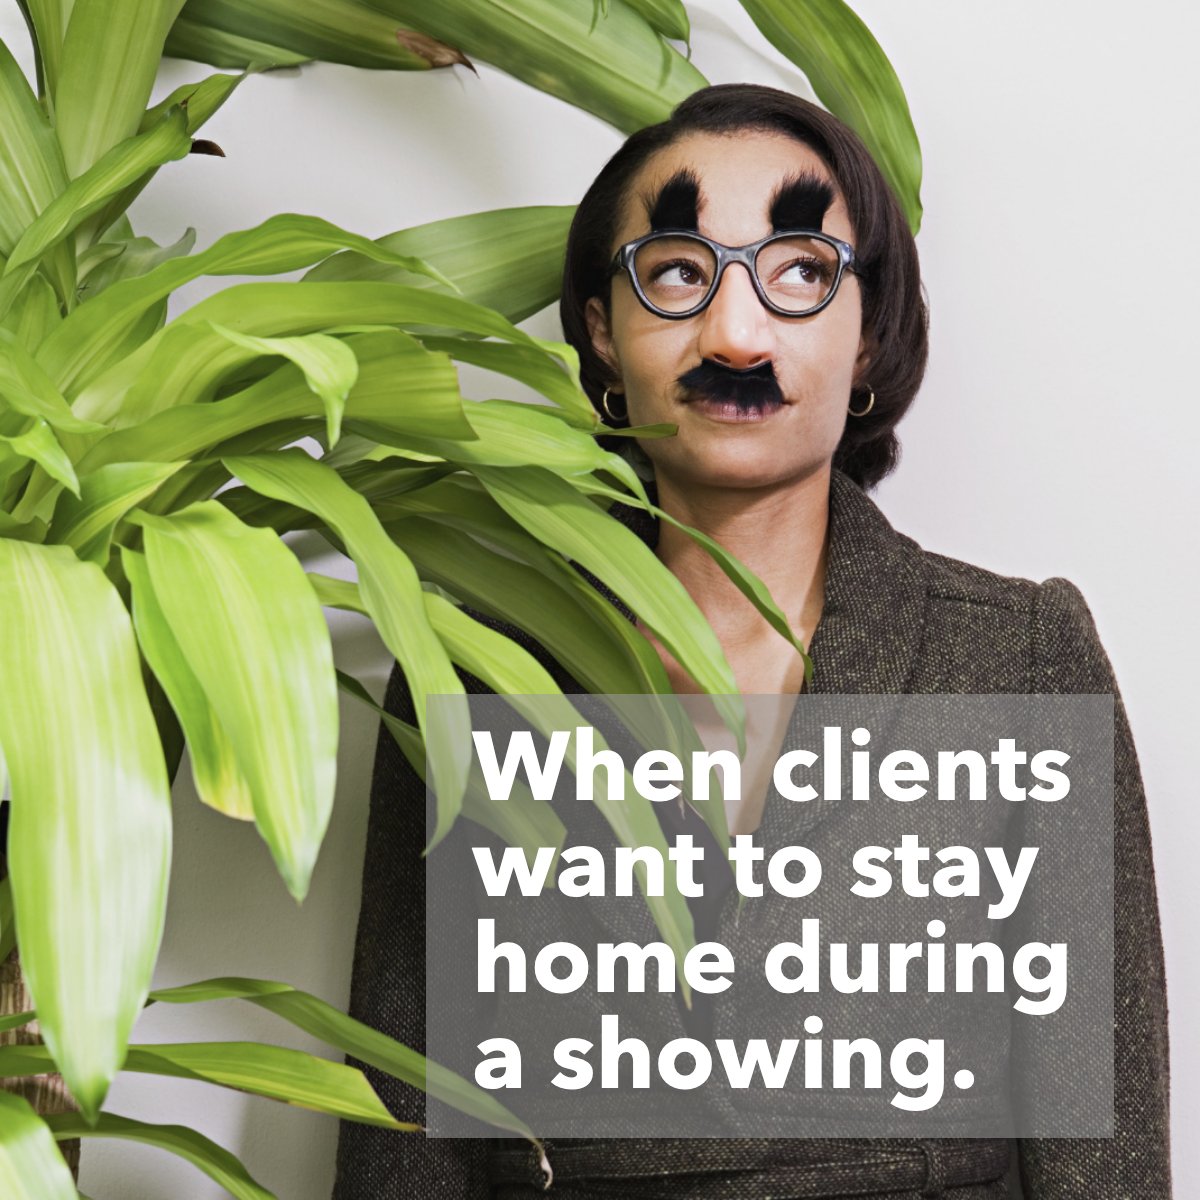 Clients be like, Incognito mode: ON 🕵 🦸‍♂️

#realestatehumor #realestatejokes #incognito #showing #clients #openhouse